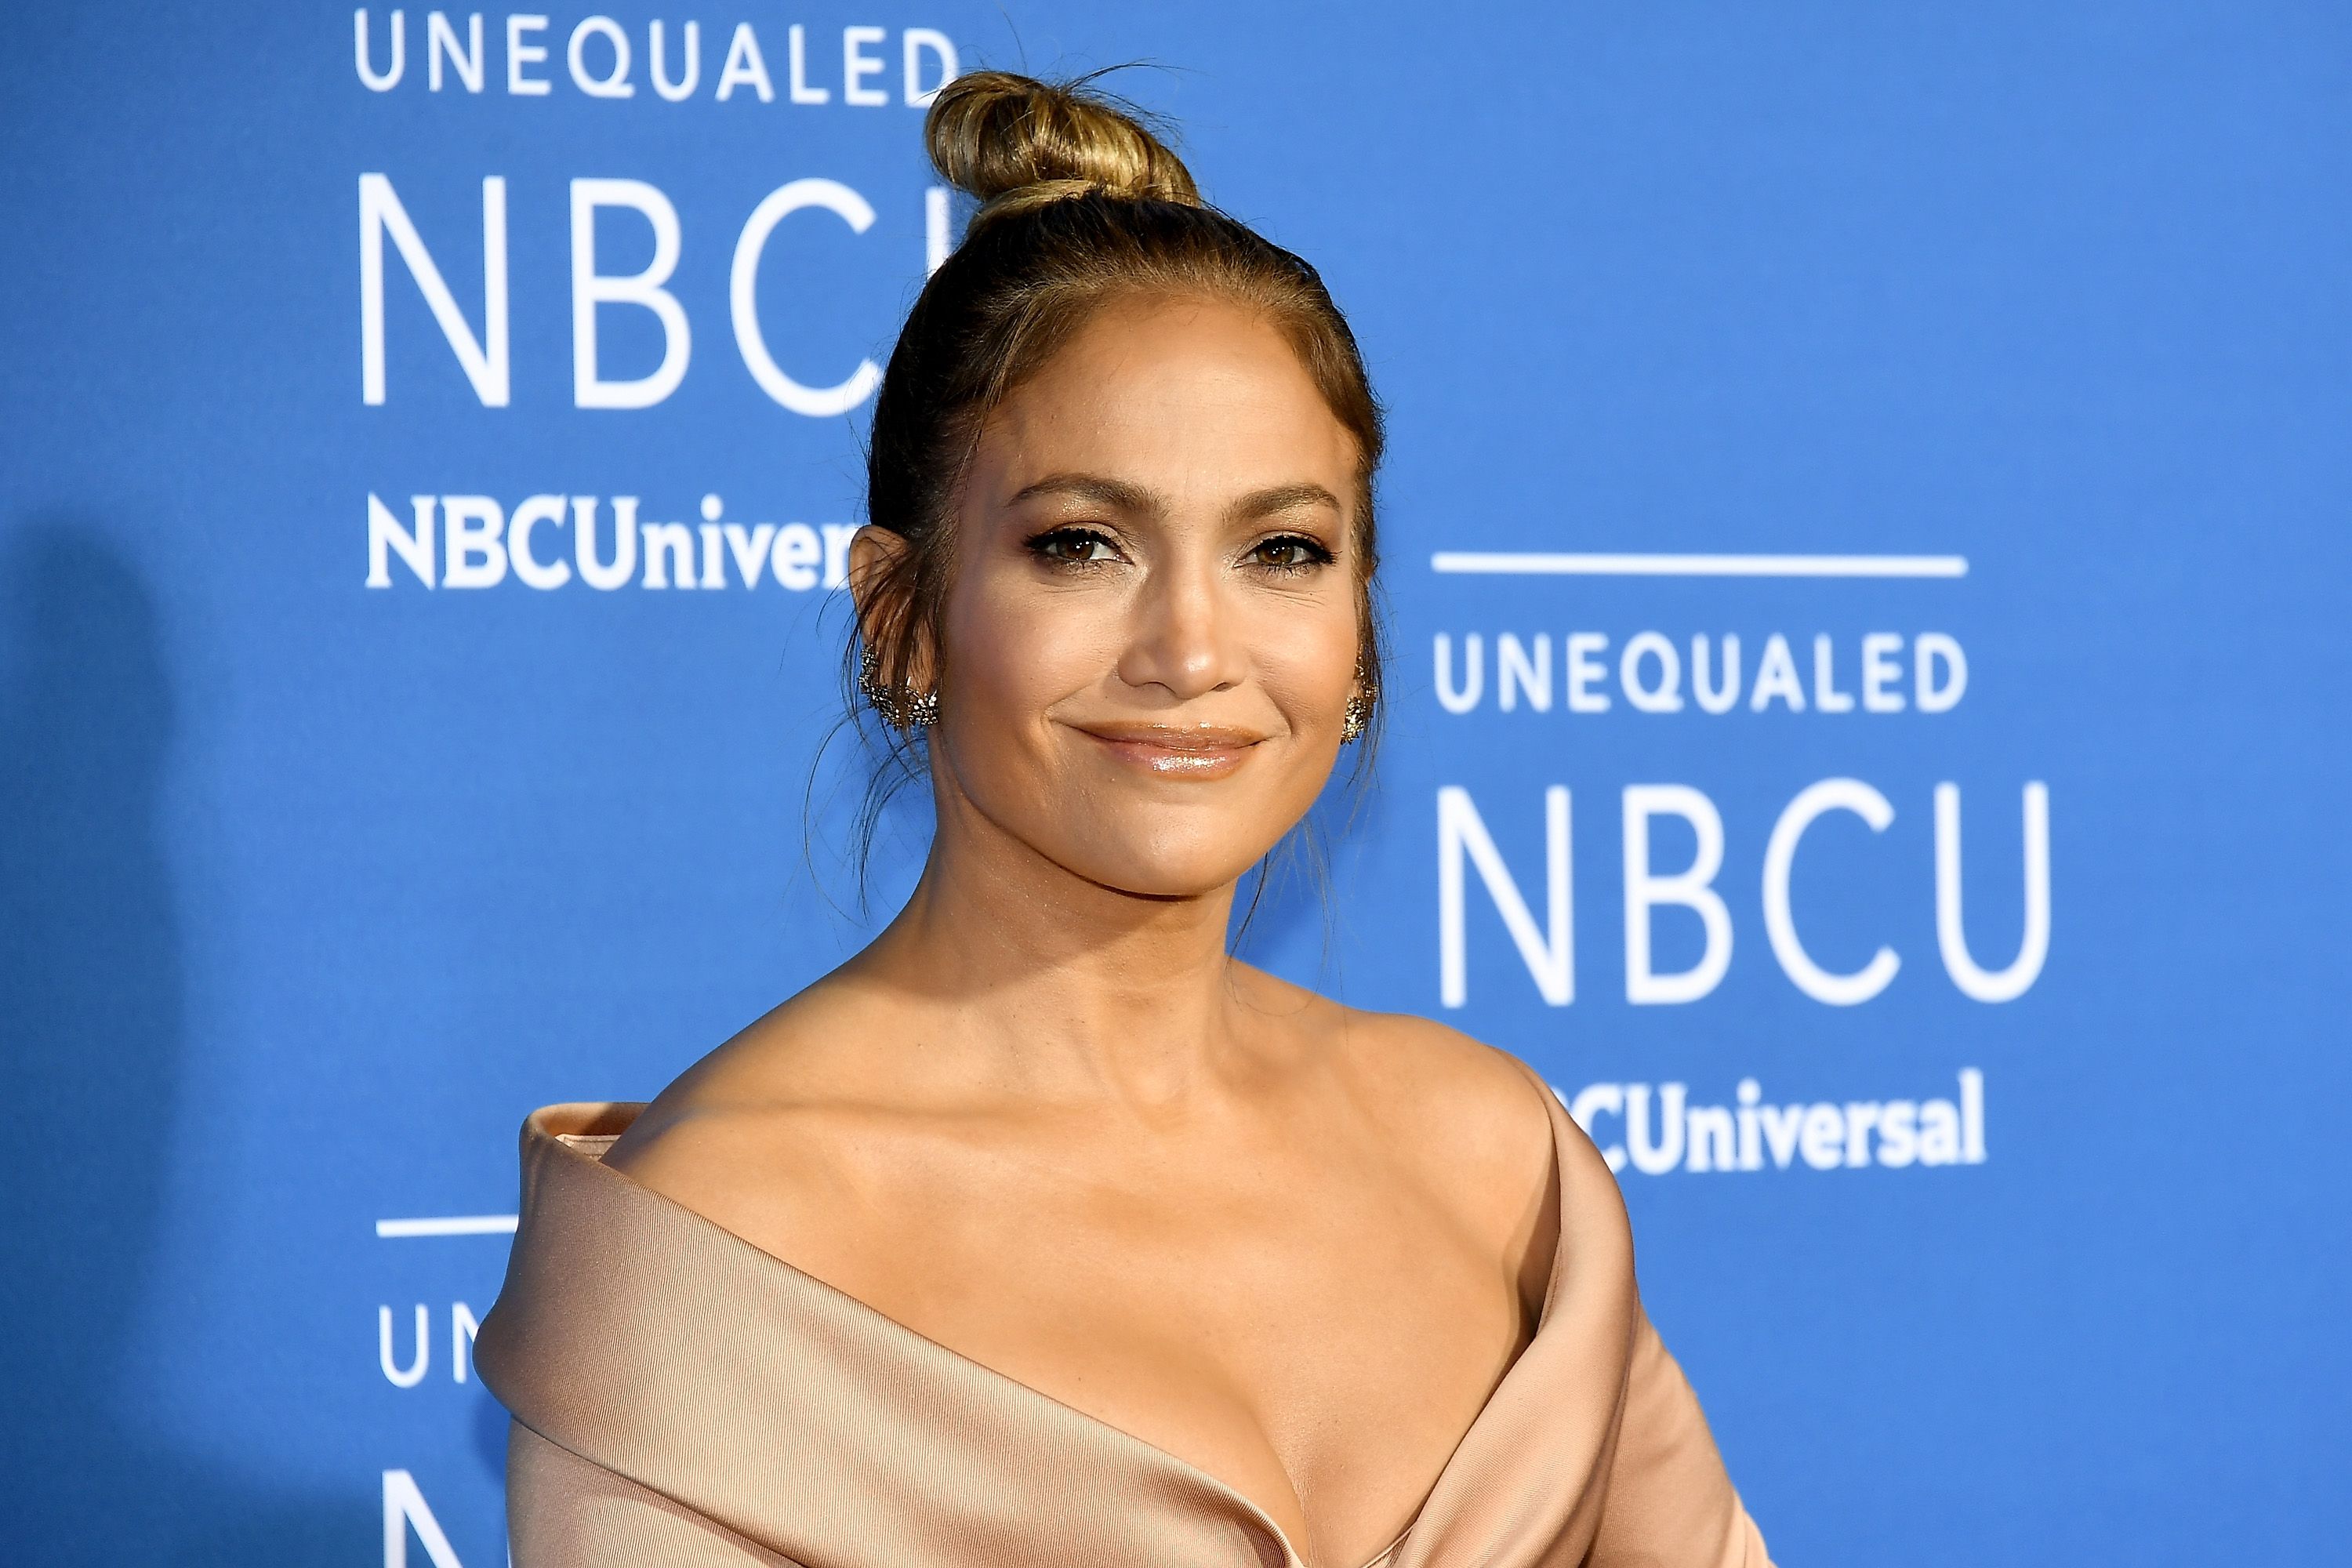 Jennifer Lopez at the 2017 NBCUniversal Upfront at Radio City Music Hall on May 15, 2017 | Photo: Getty Images